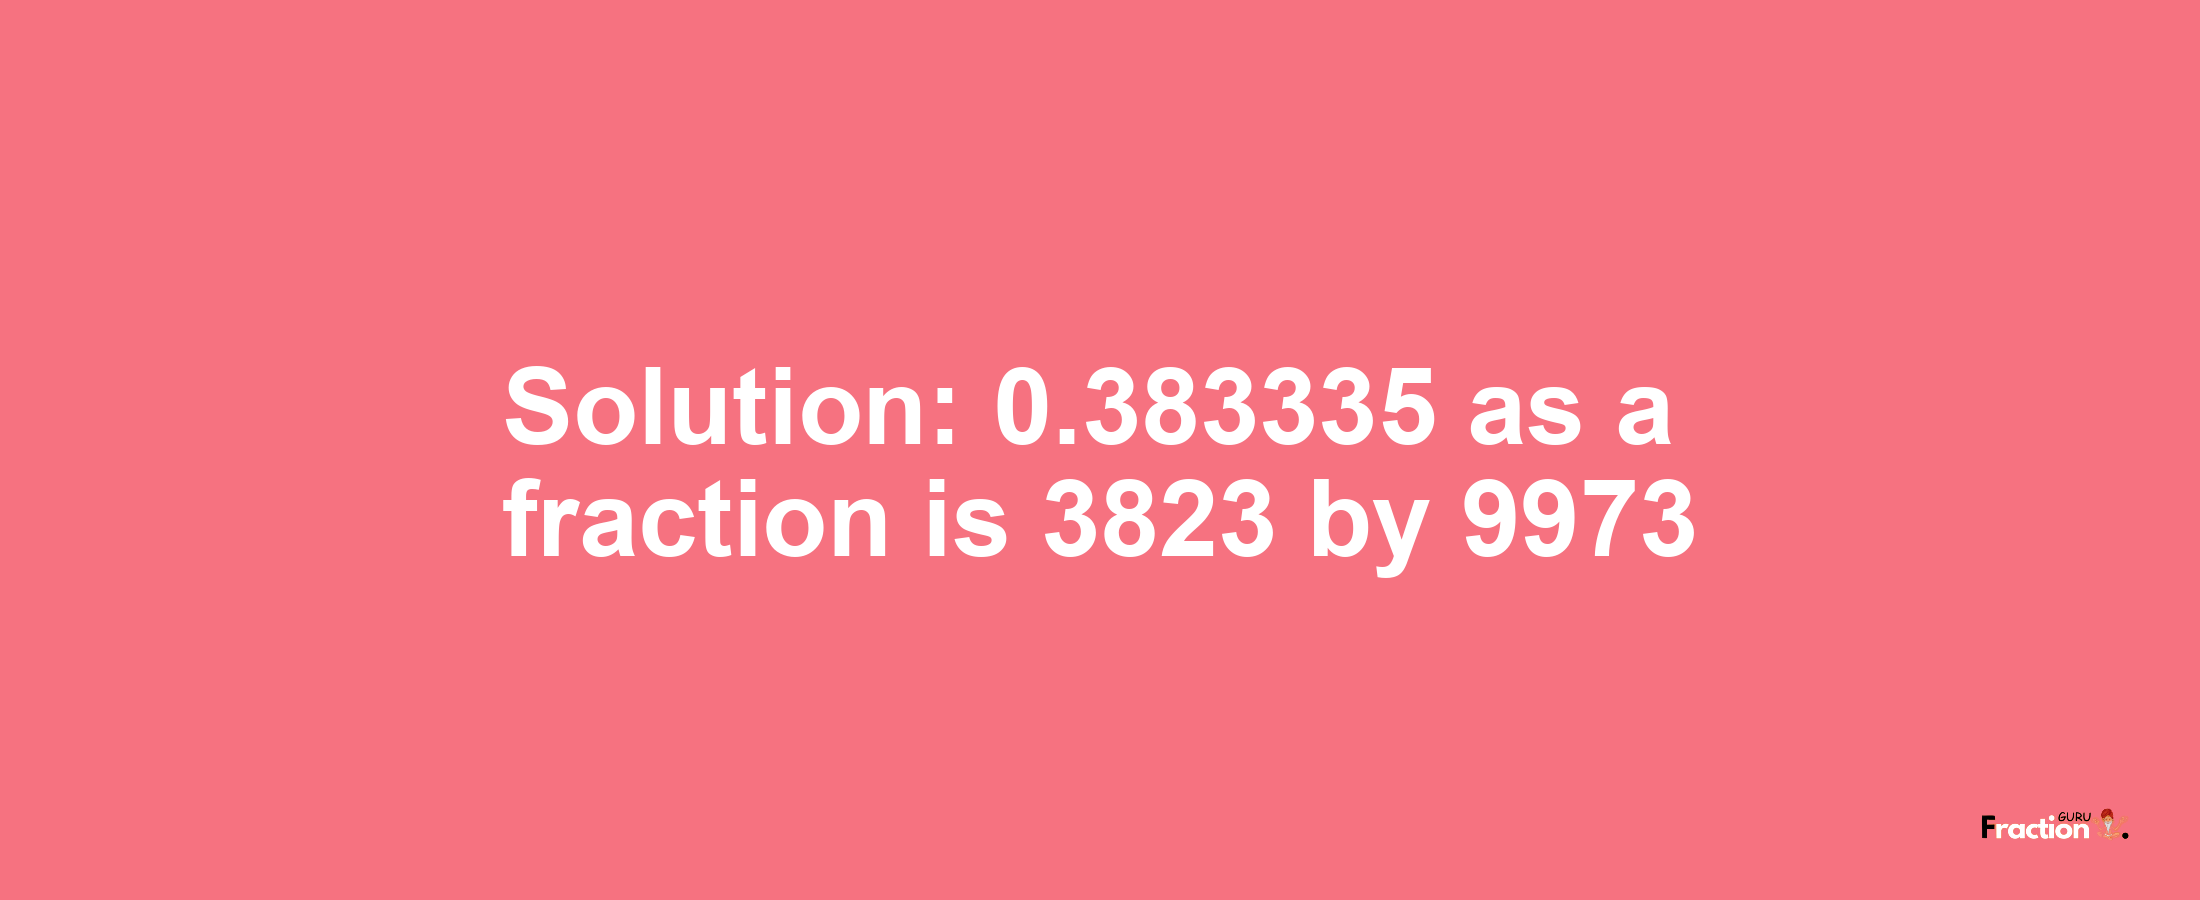 Solution:0.383335 as a fraction is 3823/9973